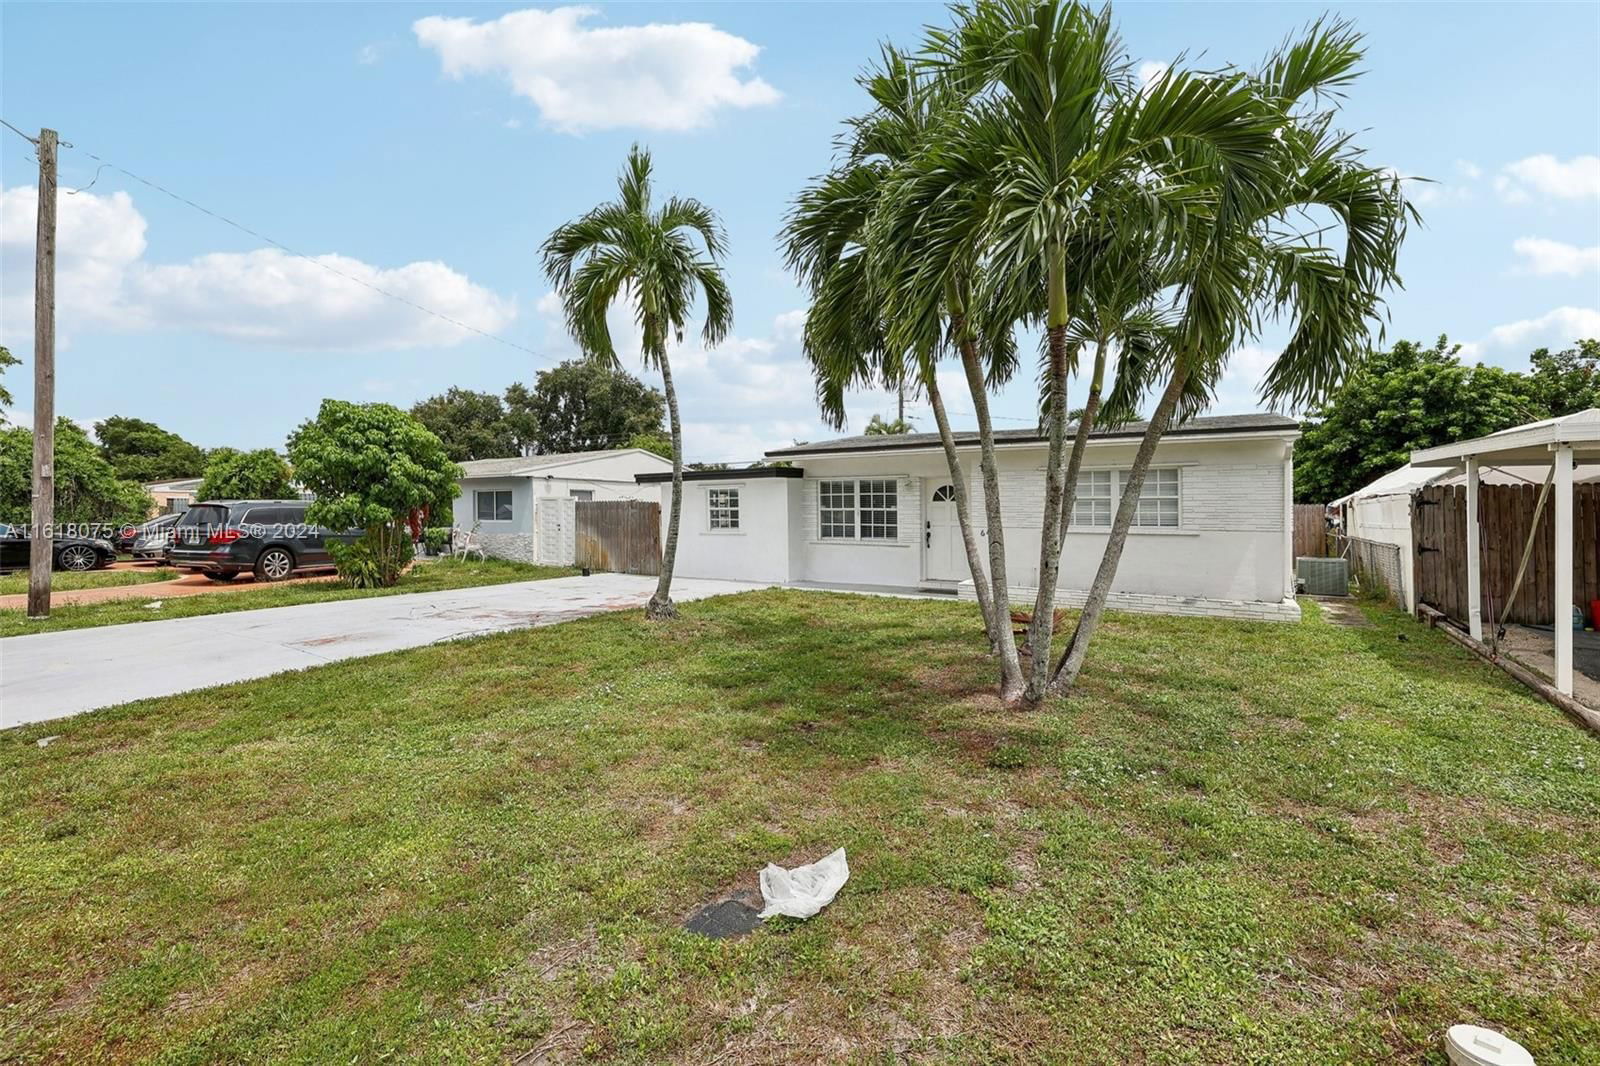 Real estate property located at 6445 22nd Ct, Broward County, WELWYN PARK, Miramar, FL